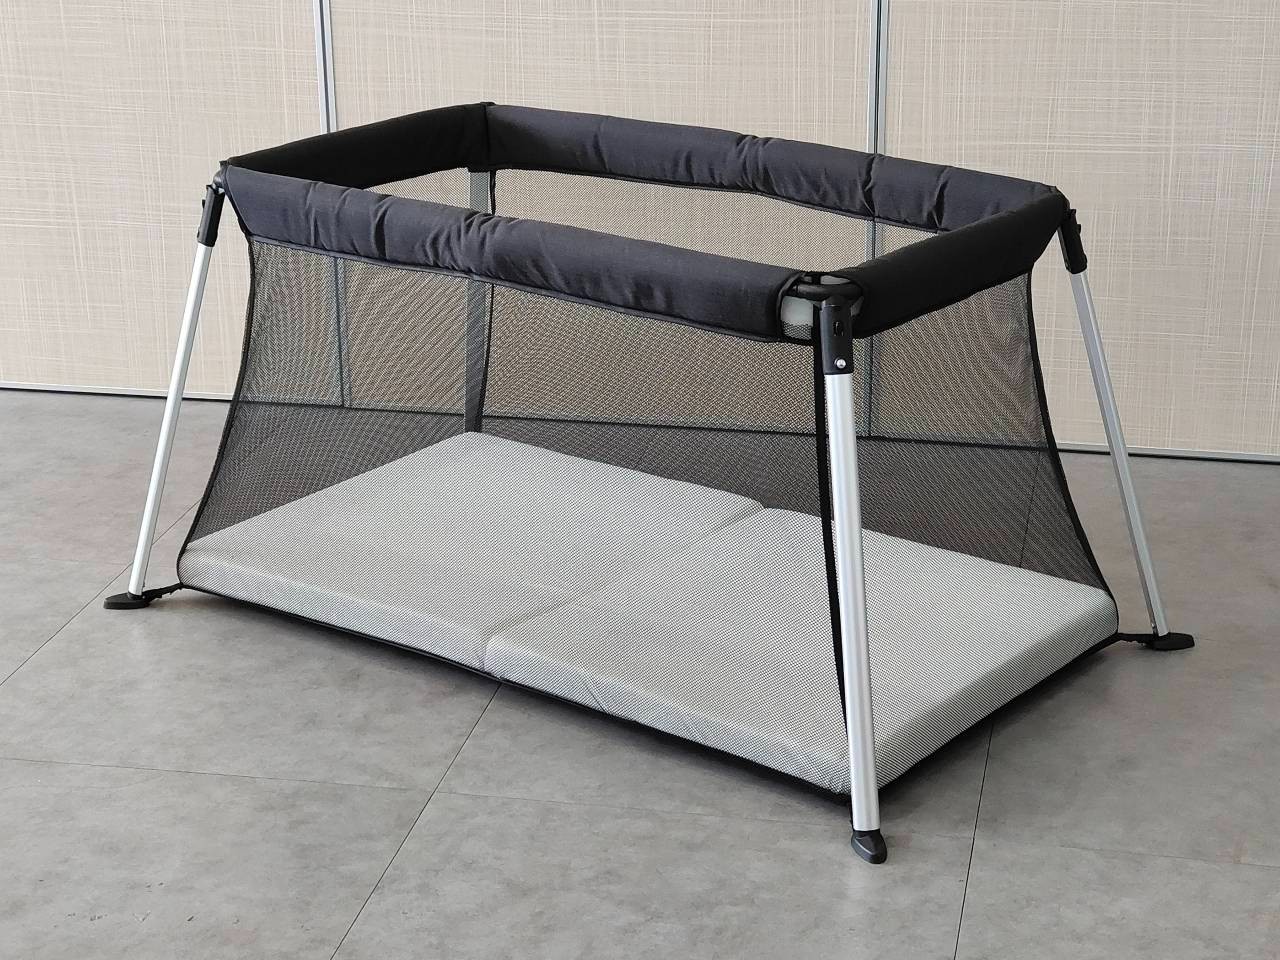 Newborn Baby Travel Cot Baby Crib Portable Child Toddler Cot folded Baby Bed with mattress